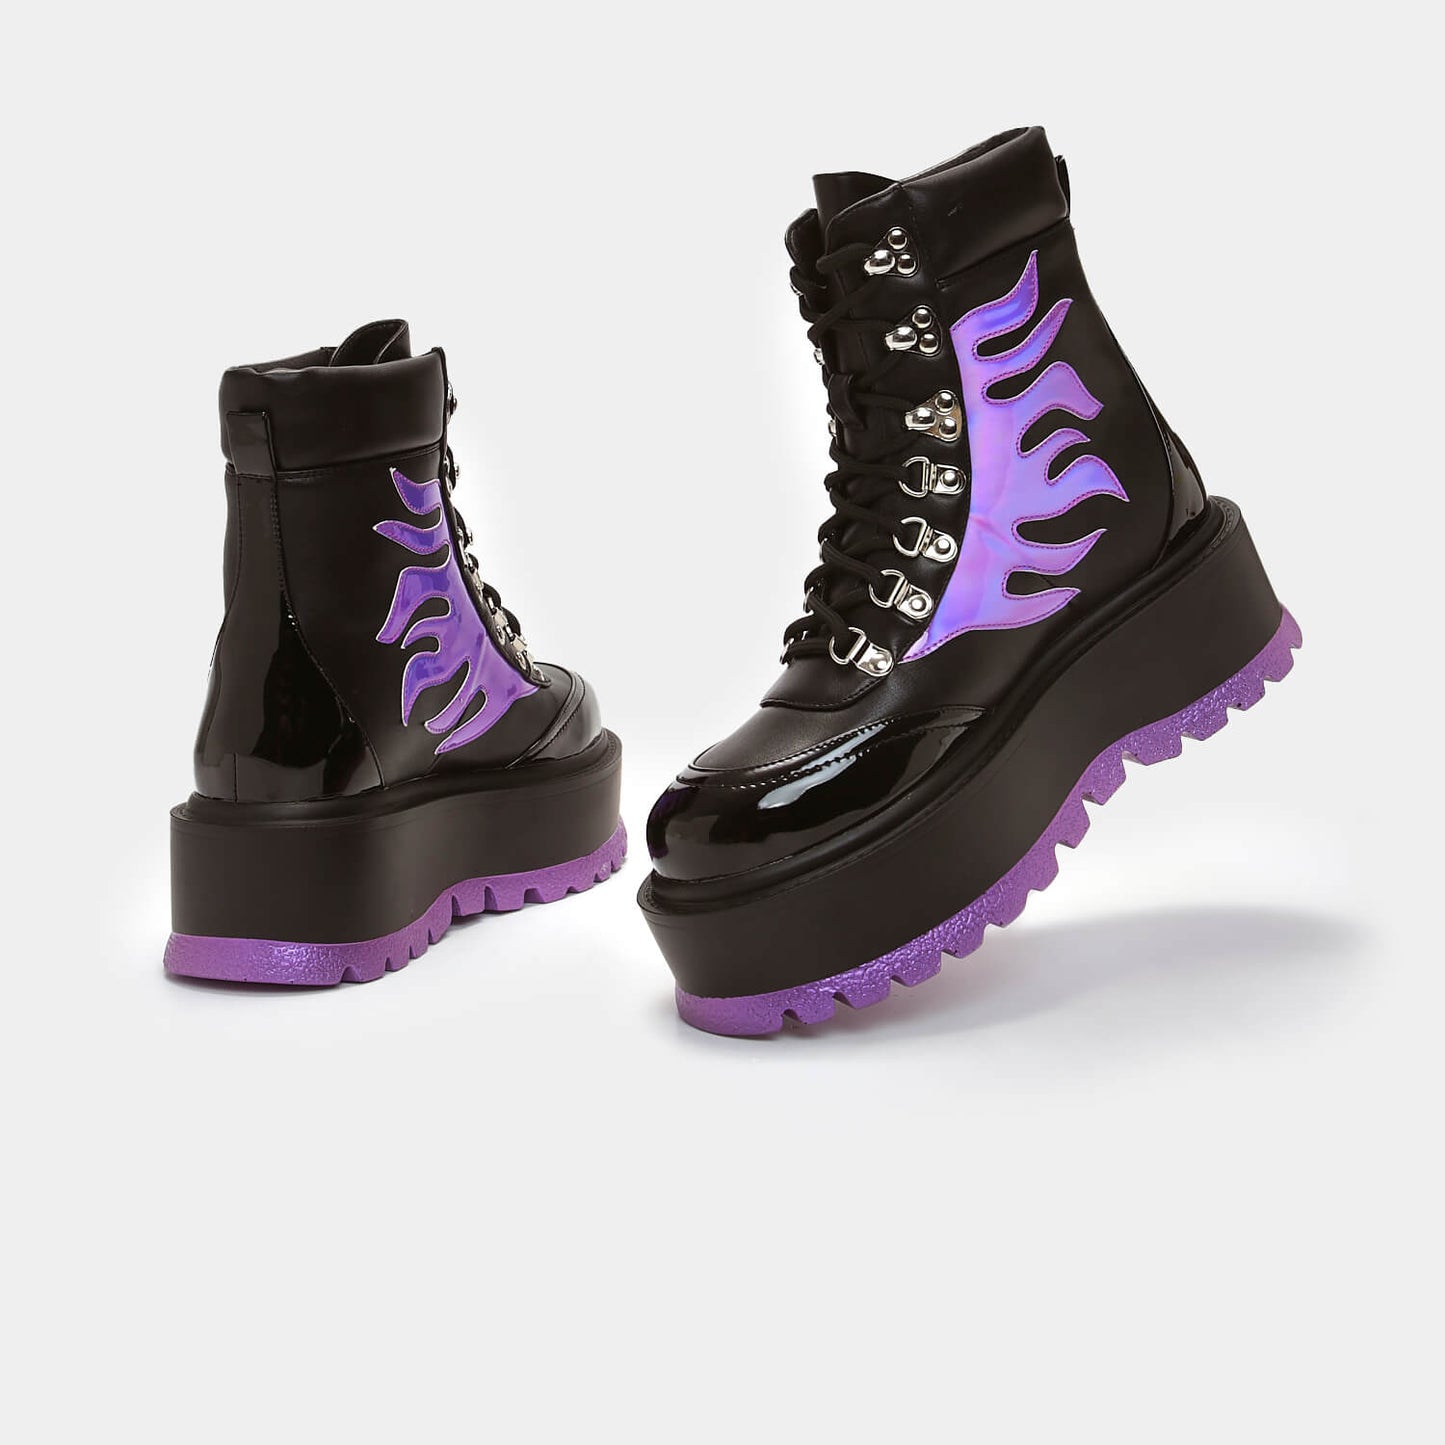 Helios Purple Hologram Flame Boots - Ankle Boots - KOI Footwear - Purple - Back and Side View